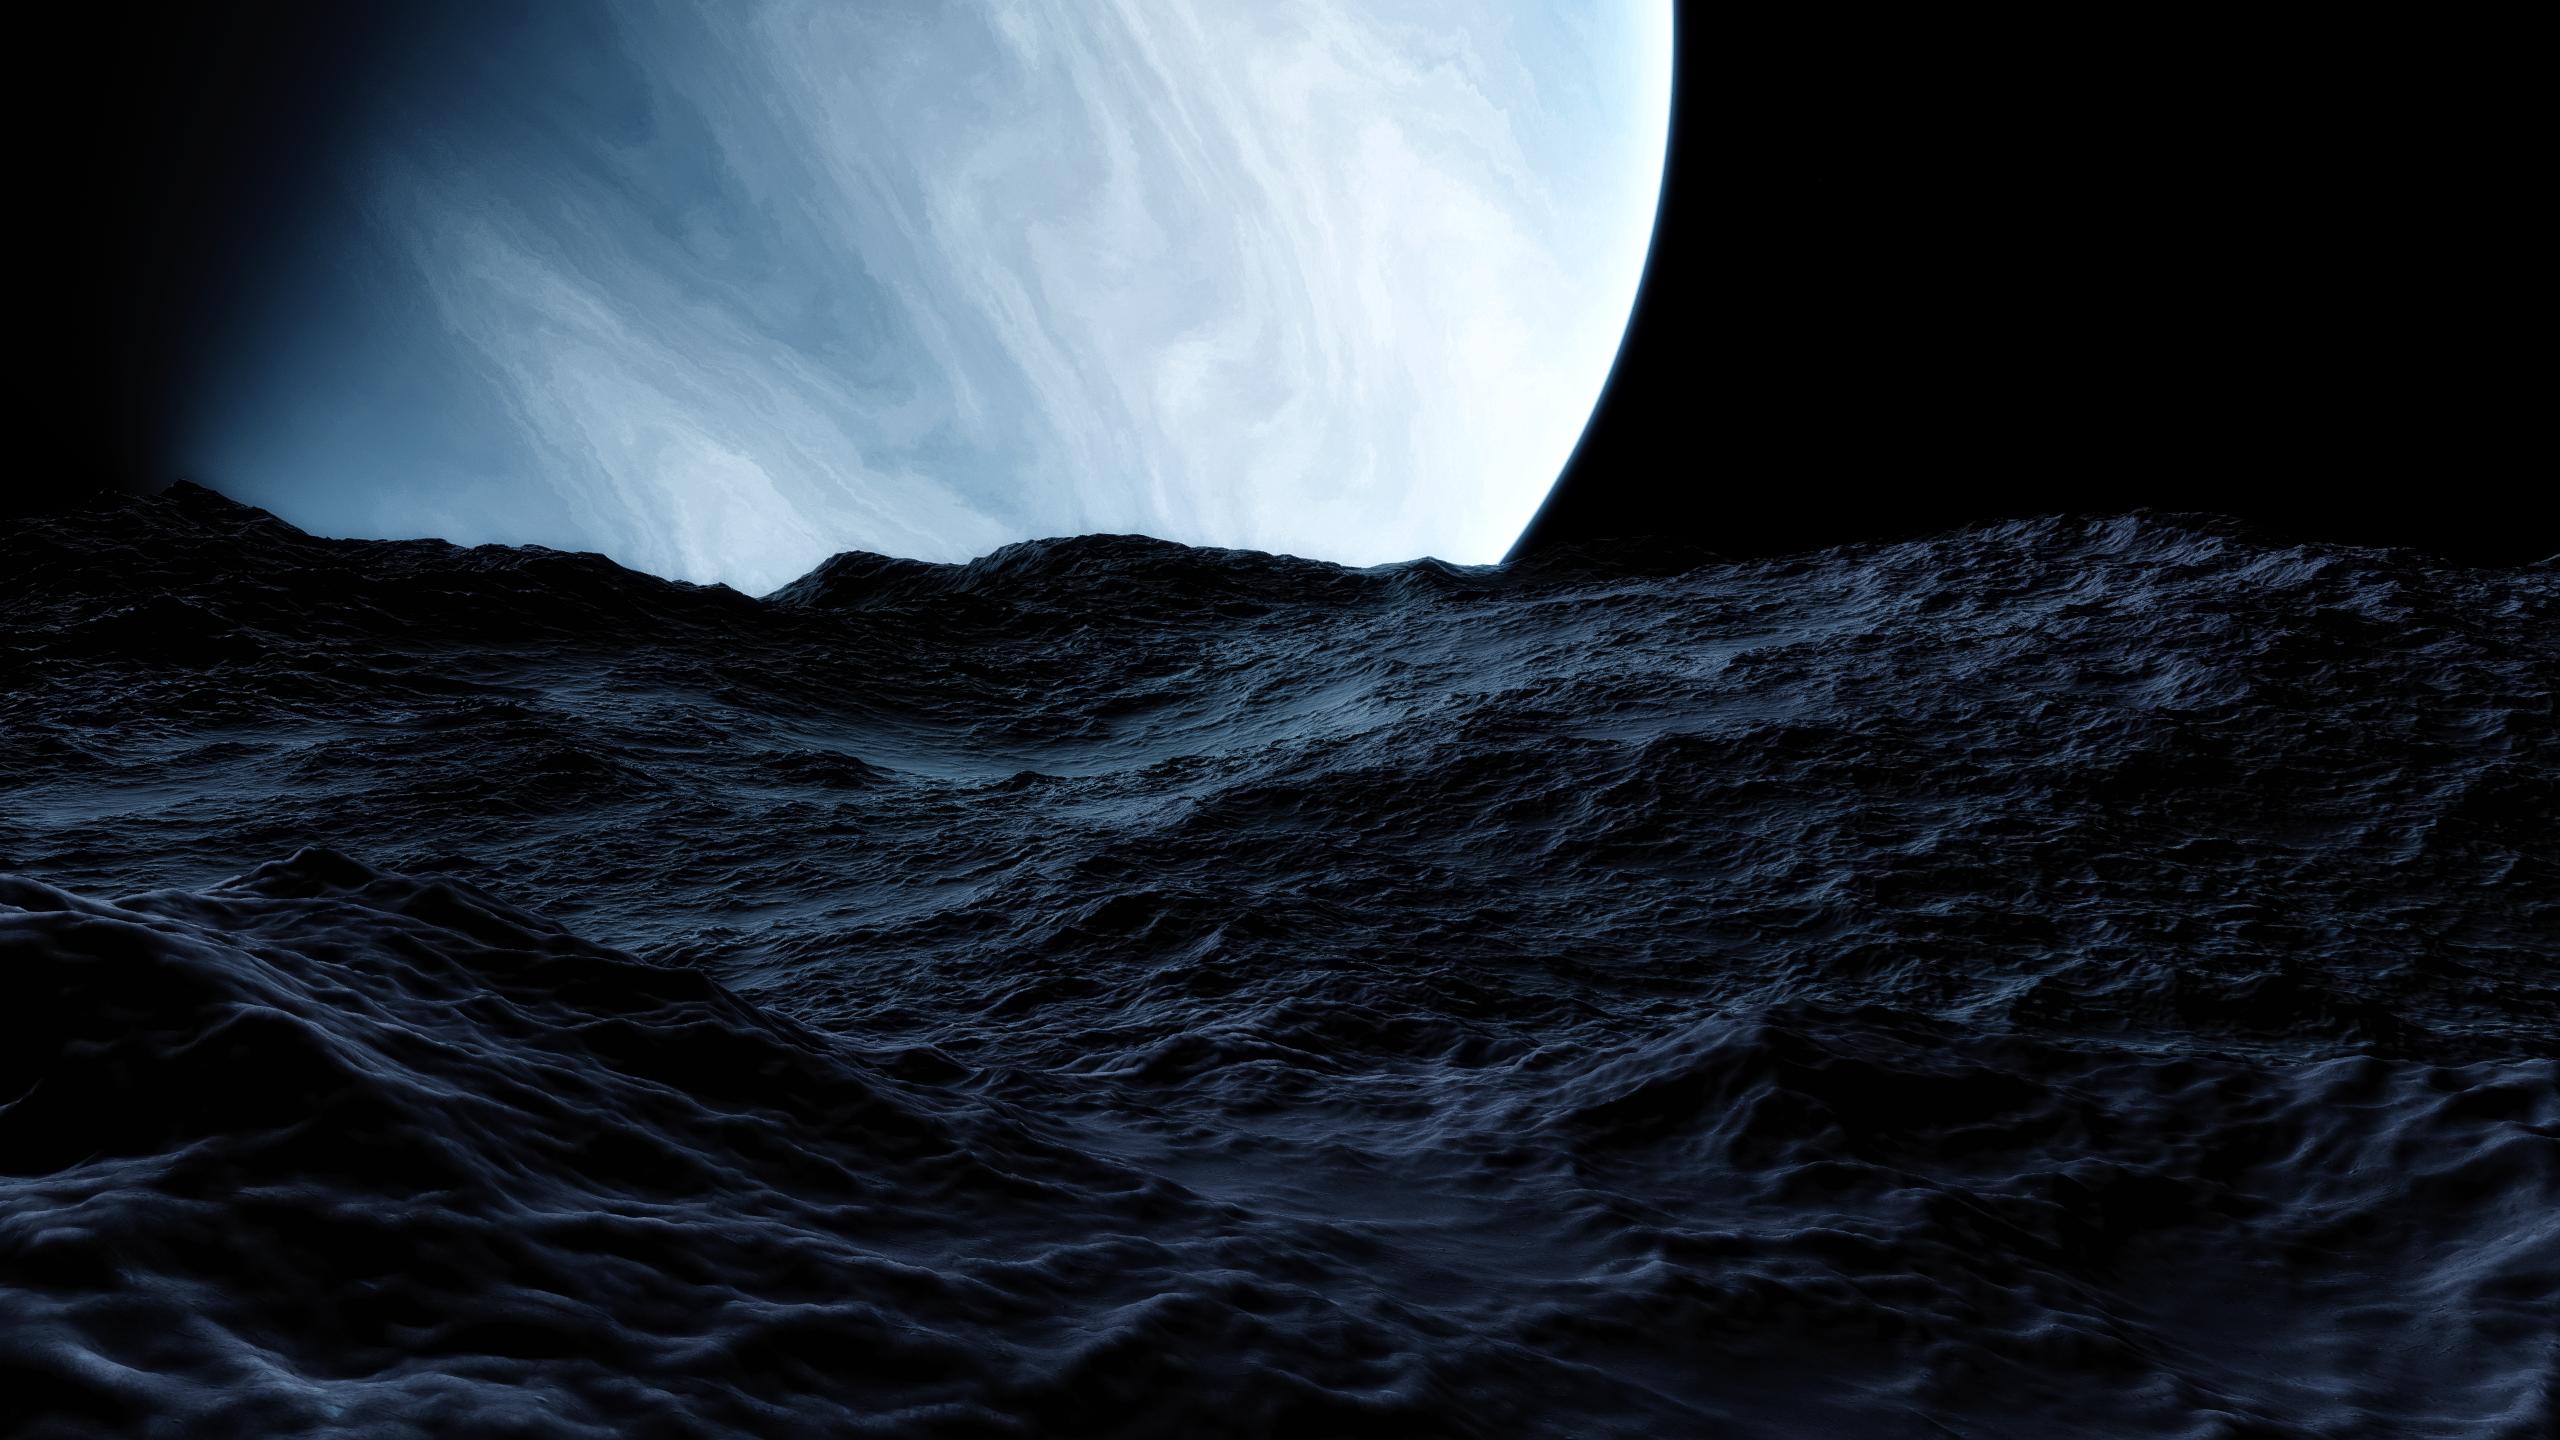 View from asteroid (Space Engine)